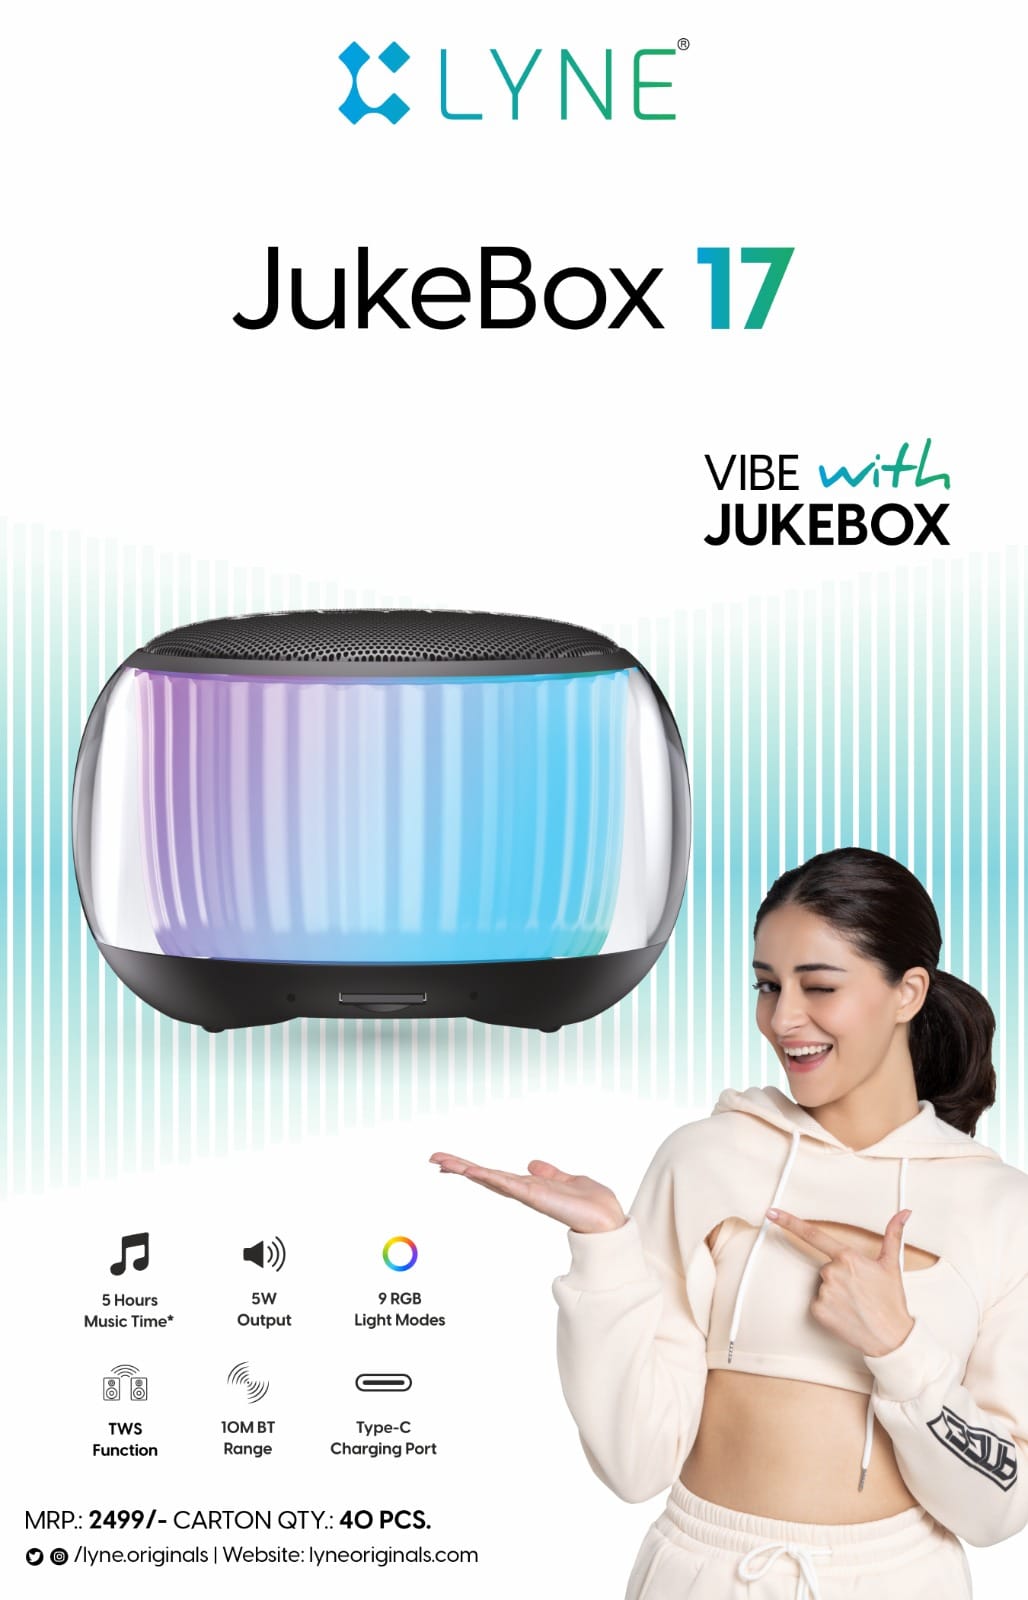 LYNE JukeBox 17 5W Output Wireless Speaker with 5 Hours Music Time